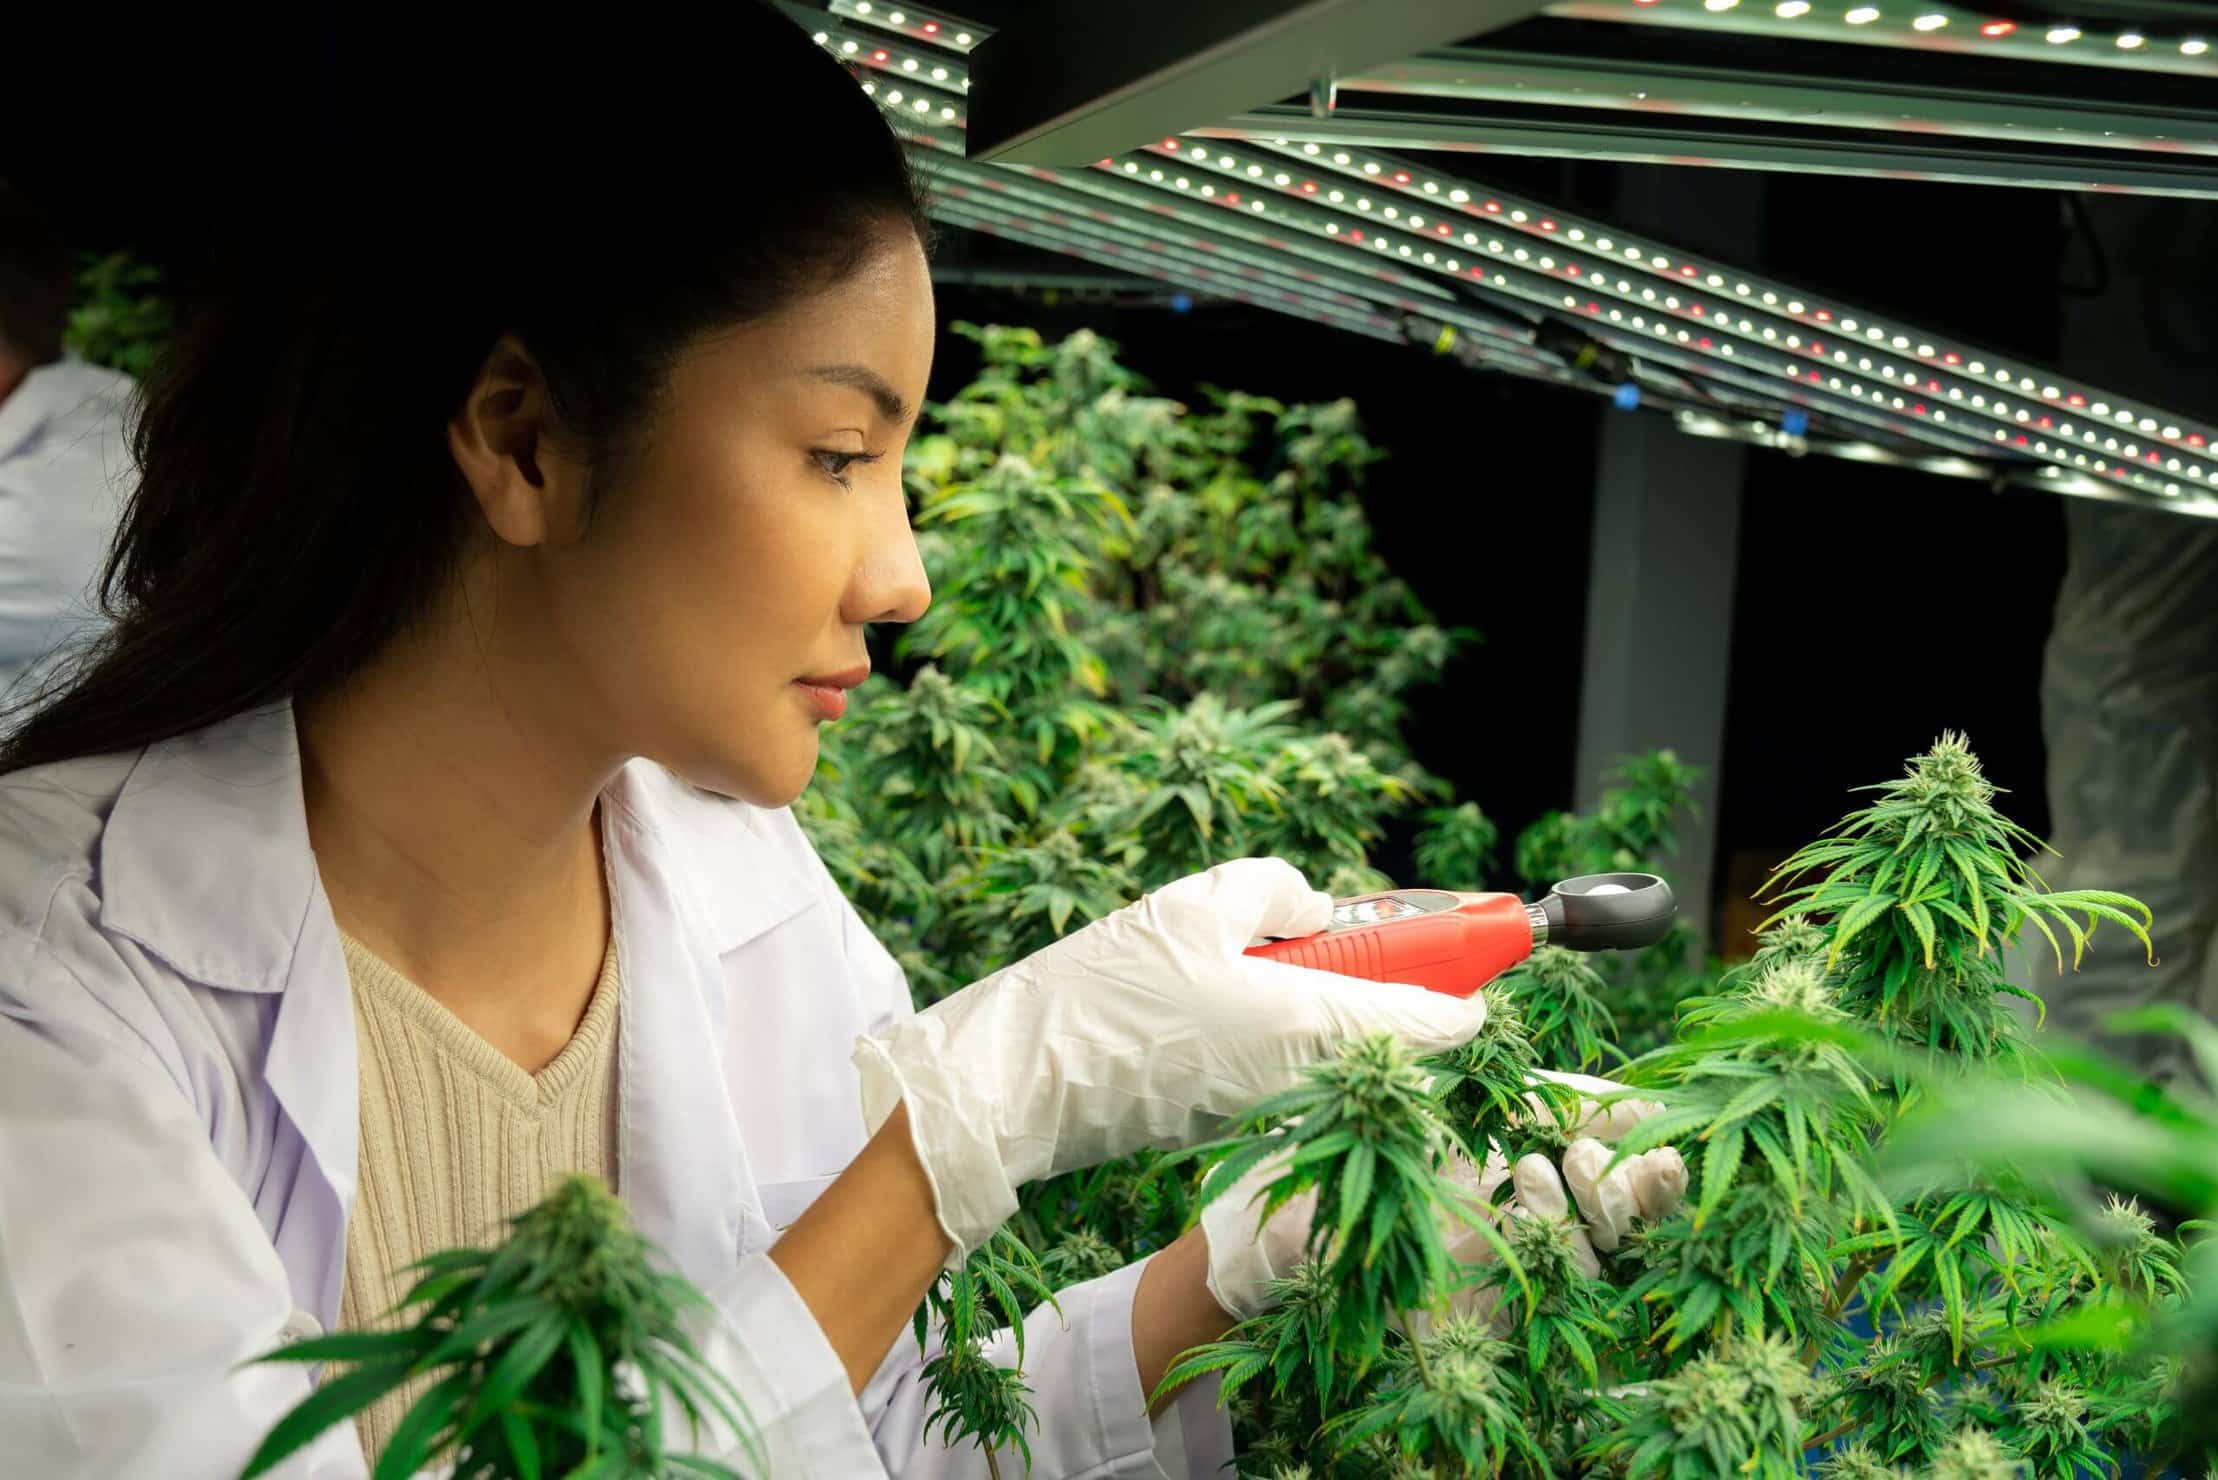 Step by Step Weed Cultivation Guide for Beginners